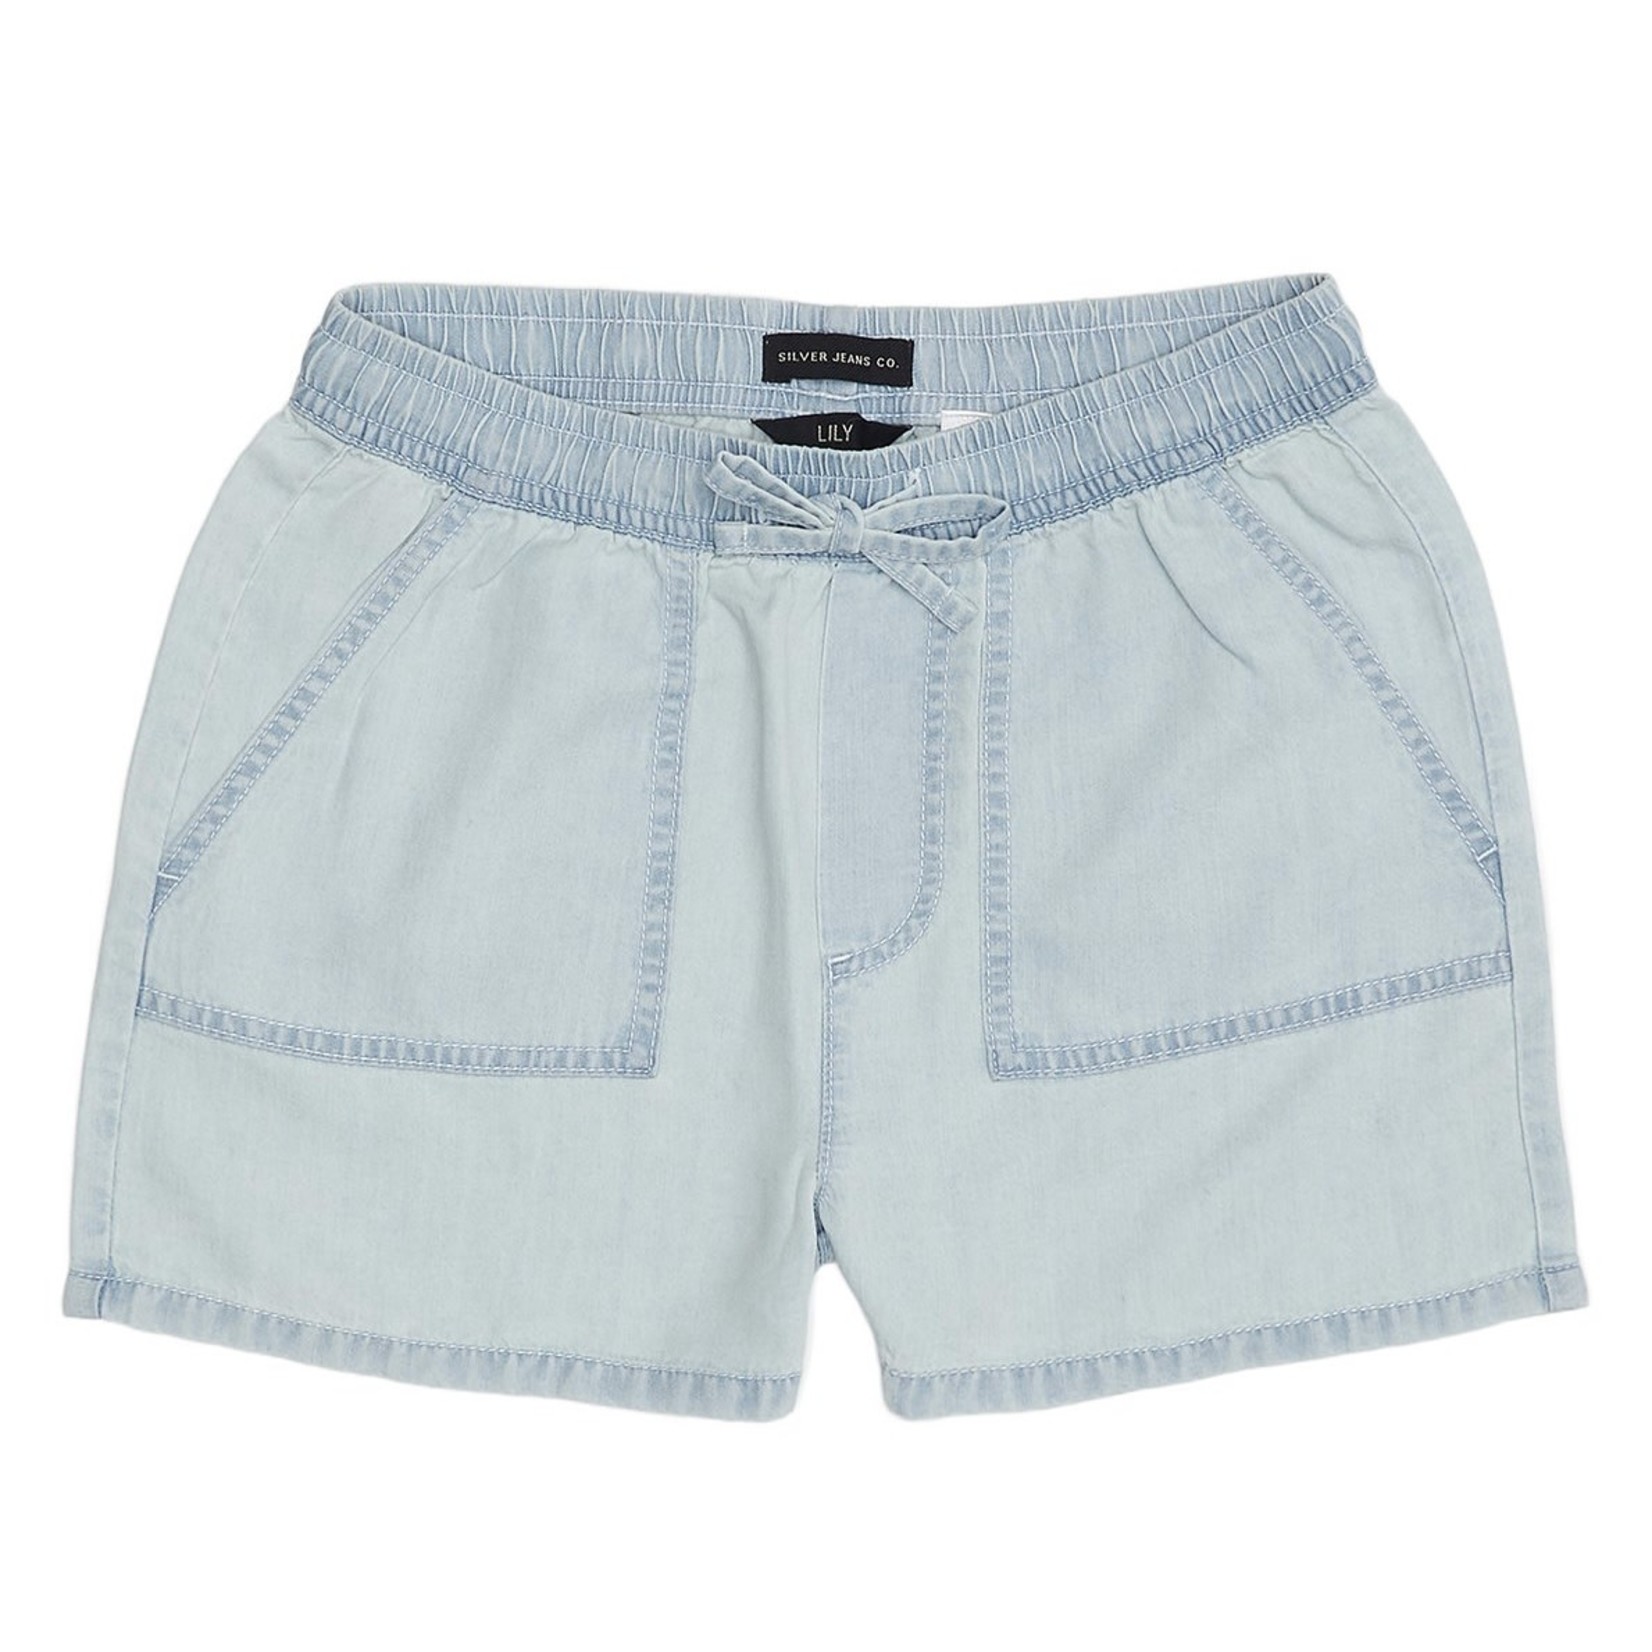 Silver Jeans Silver Jeans - High Waisted Shorts